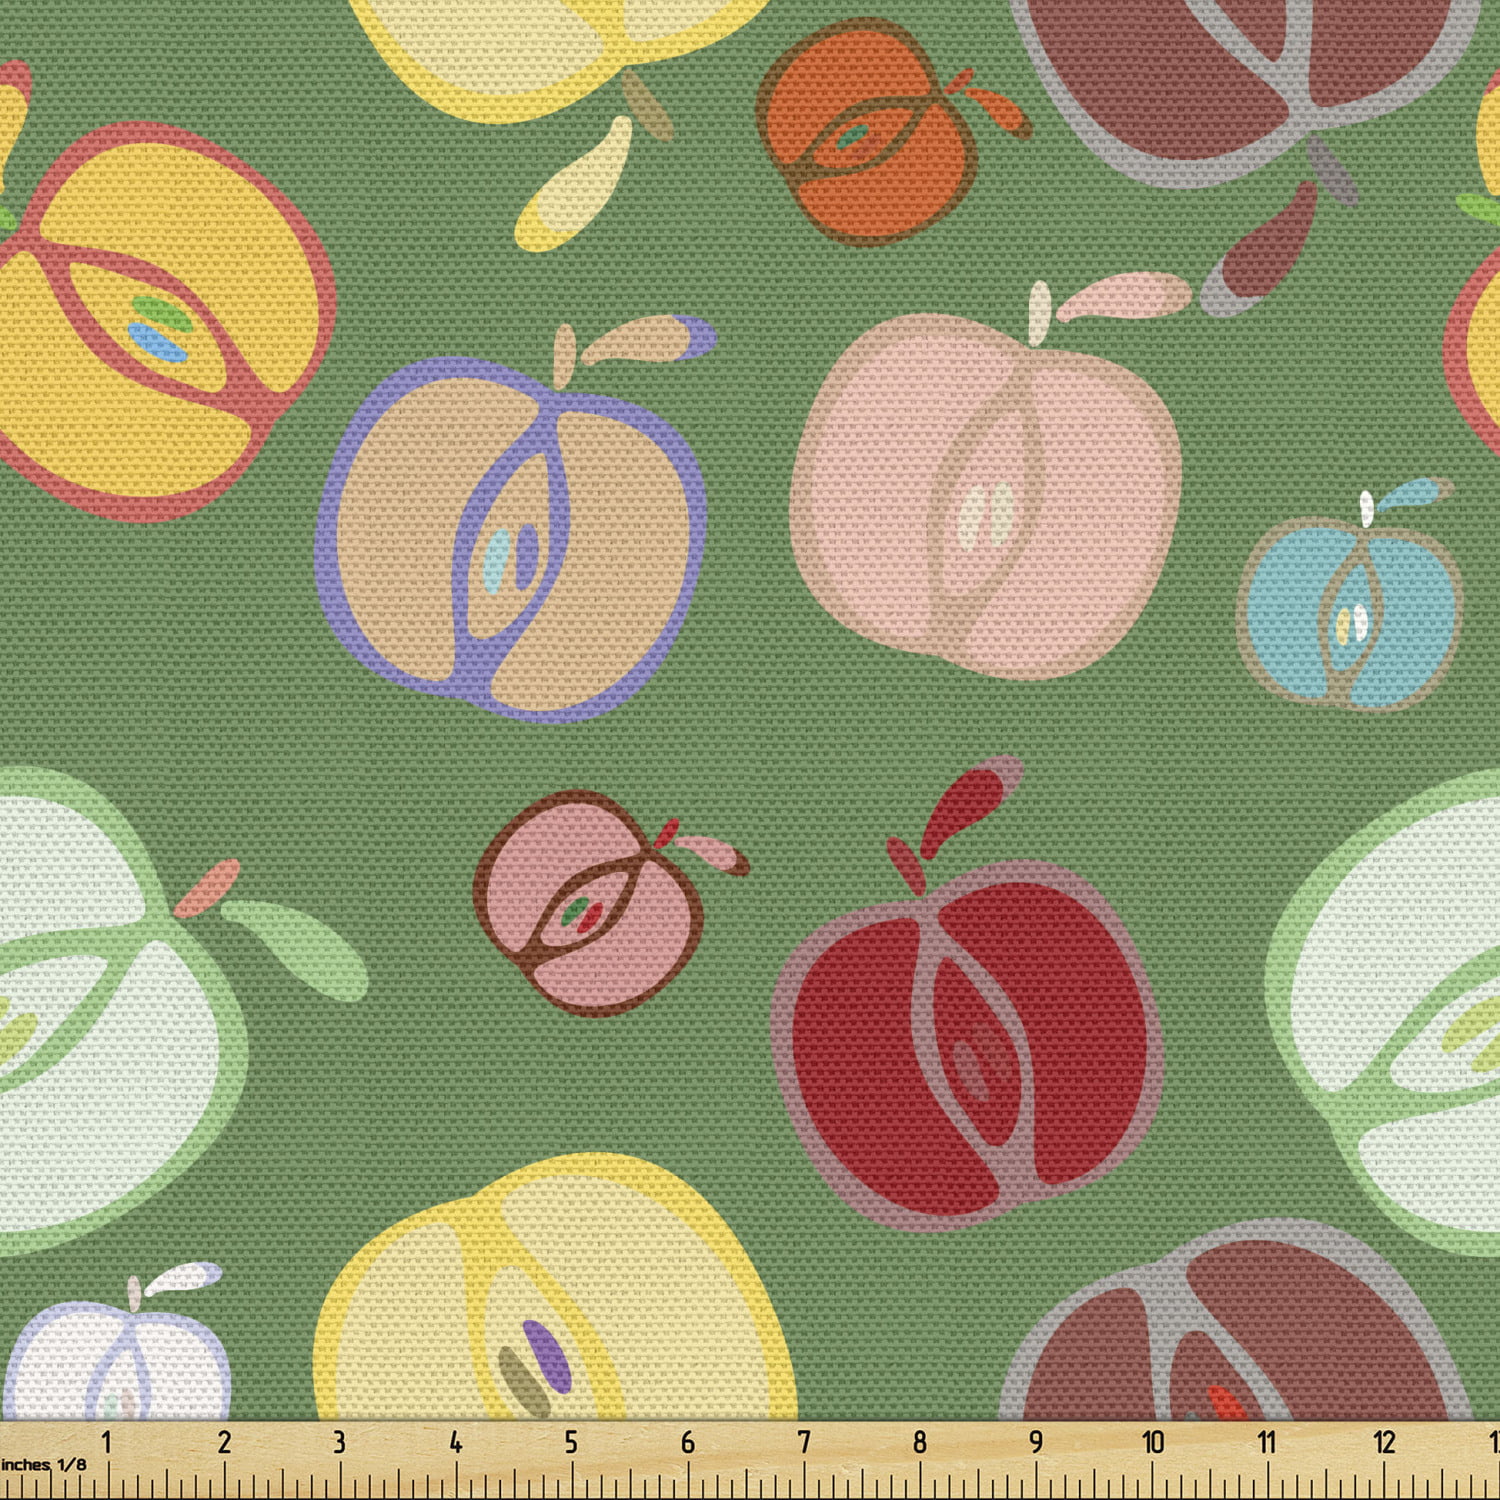 Autumn Fabric by the Yard Upholstery, Apple Lover Seasonal Fruits Colorful  Doodle Art Print Illustration, Decorative Fabric for DIY and Home Accents,  Reseda Green Multicolor by Ambesonne